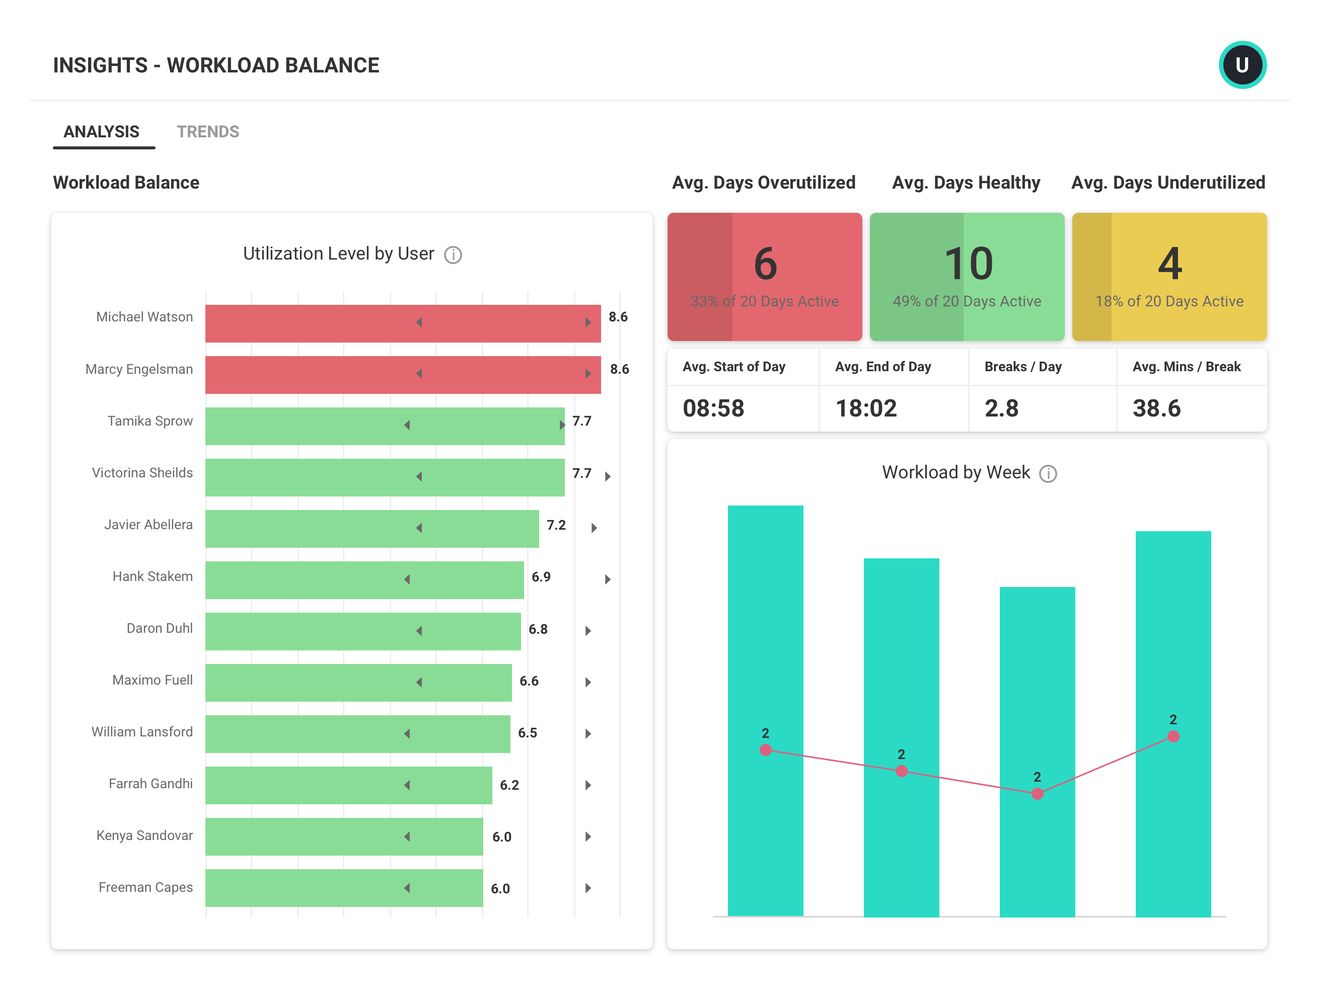 An Insights report showing workload balance showing utilization by user, average days over utilized and average days healthy.